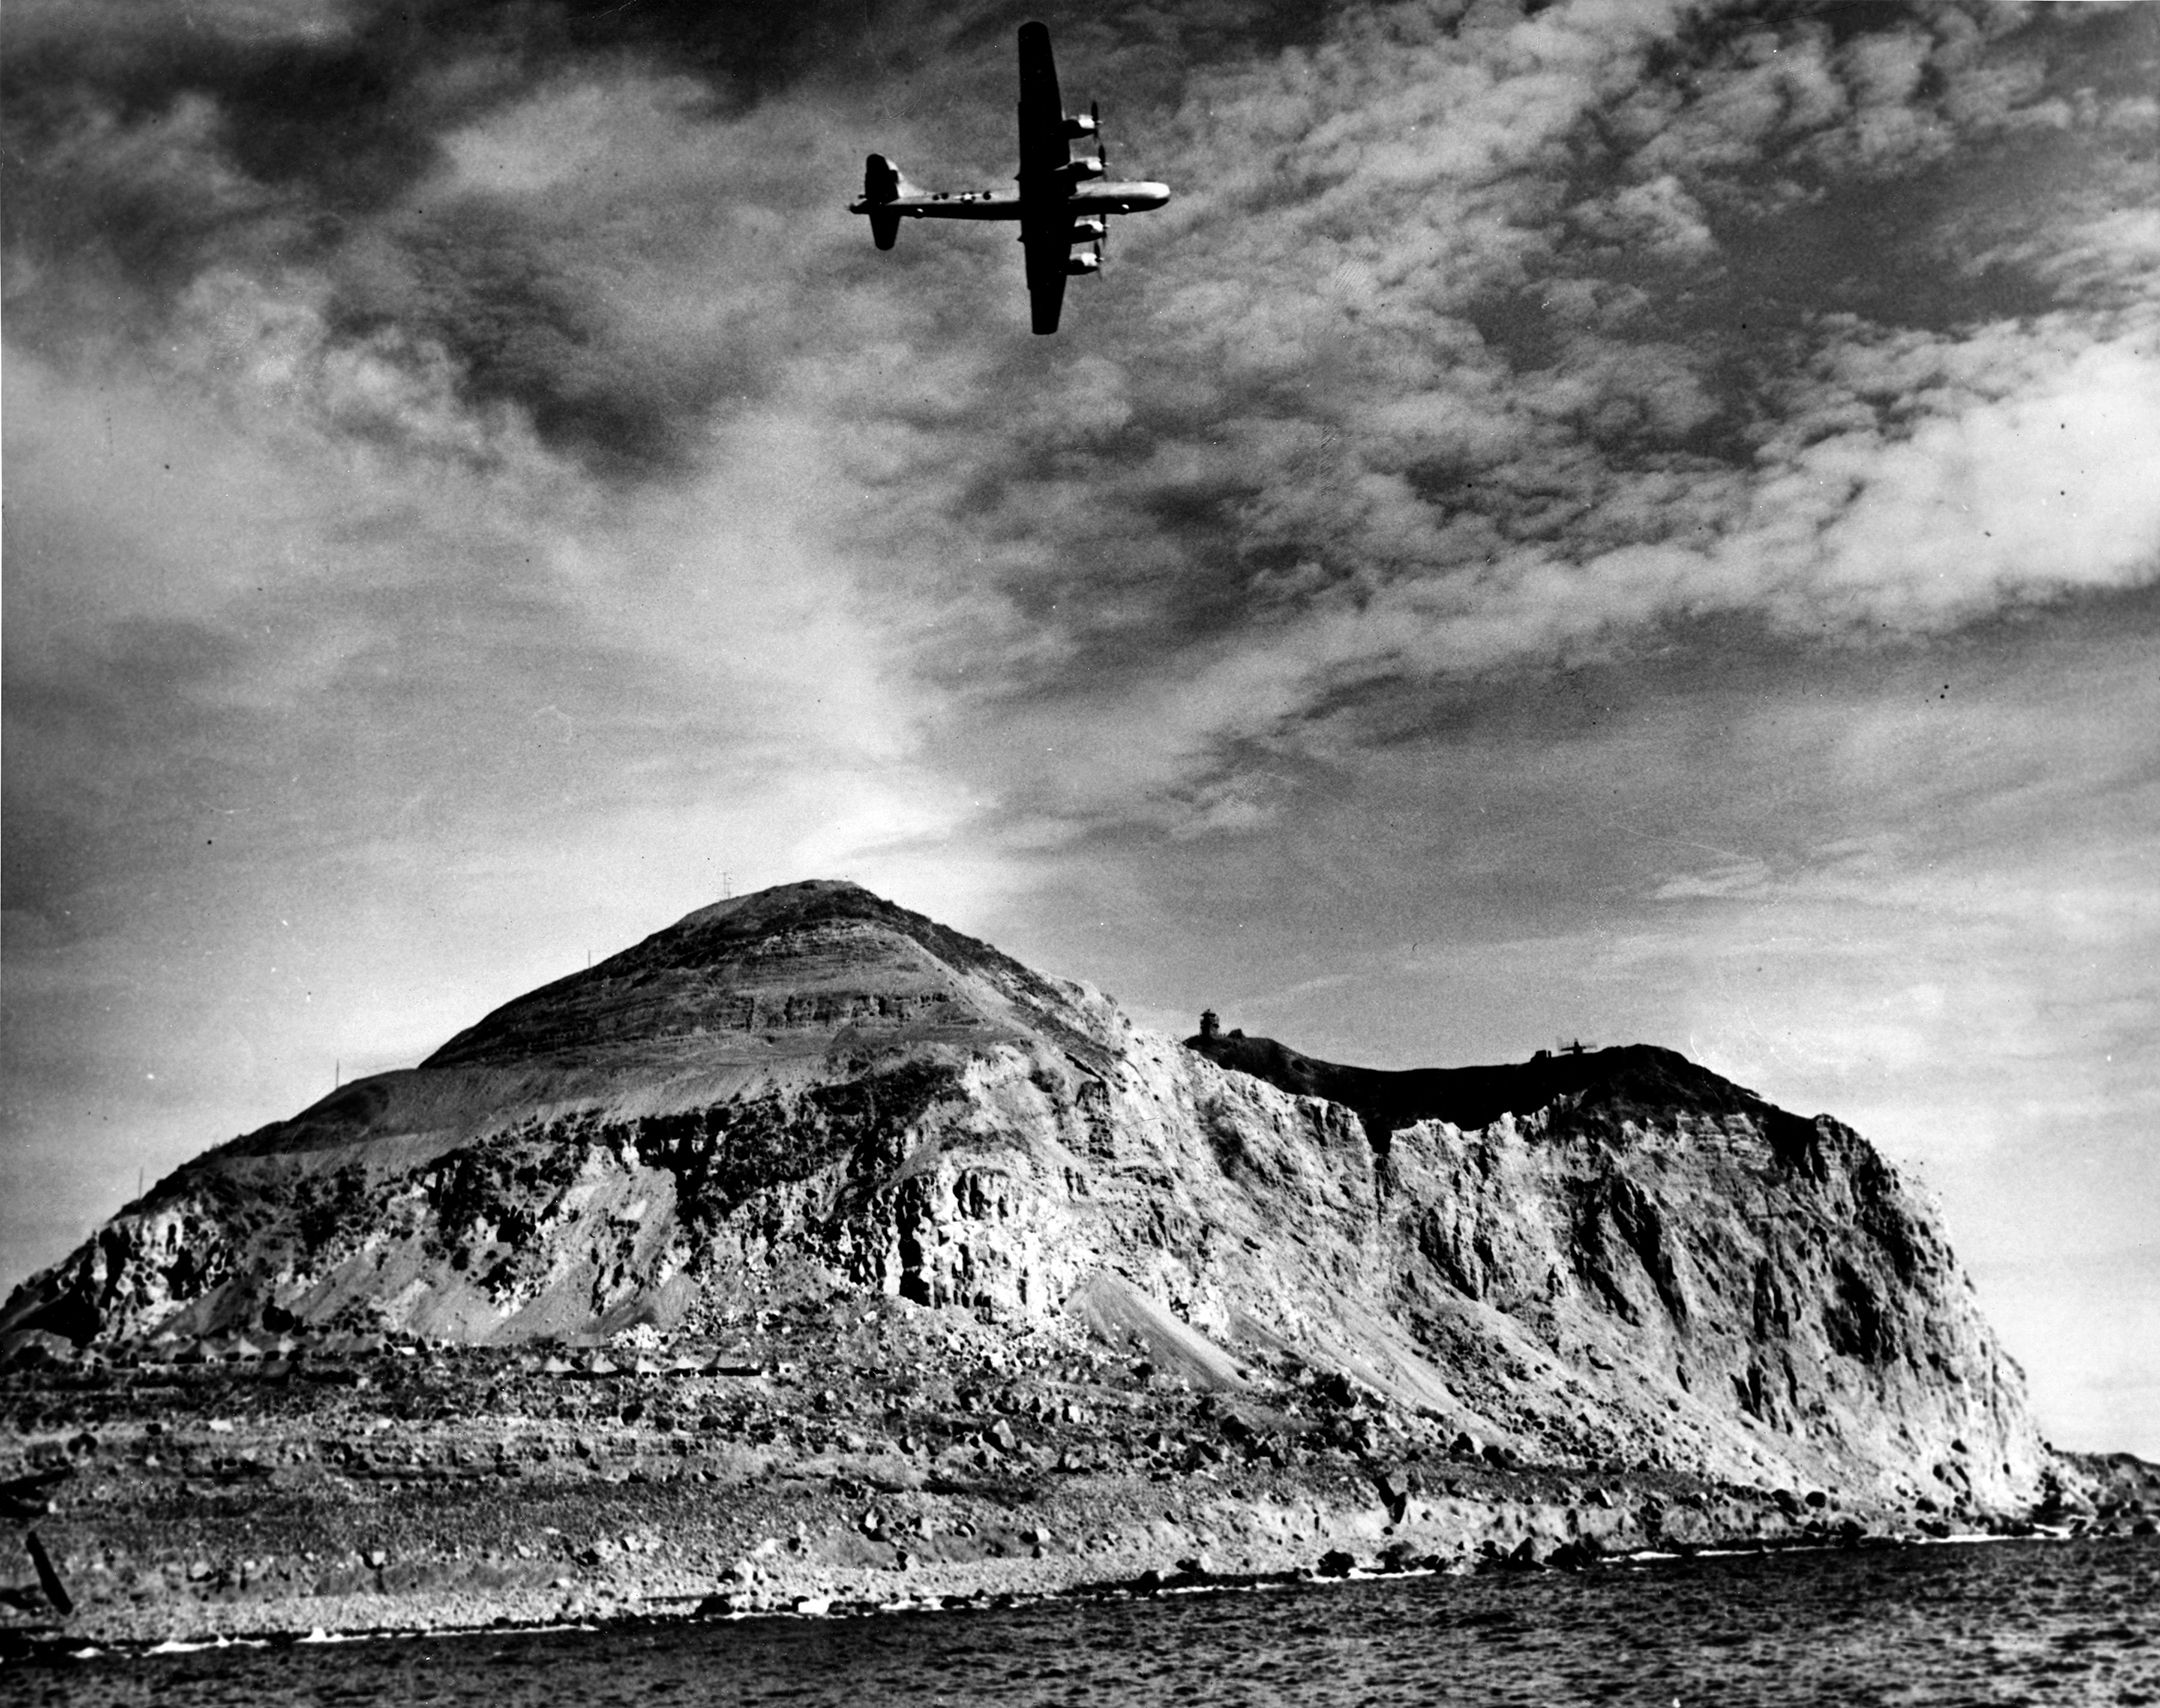 A Boeing B-29 Superfortress bomber of the U.S. 20th Air Force flies over Mount Suribachi on the island of Iwo Jima. Army Air Forces B-29s based in the Marianas Islands raided Japanese cities from 1944 until the end of World War II. 